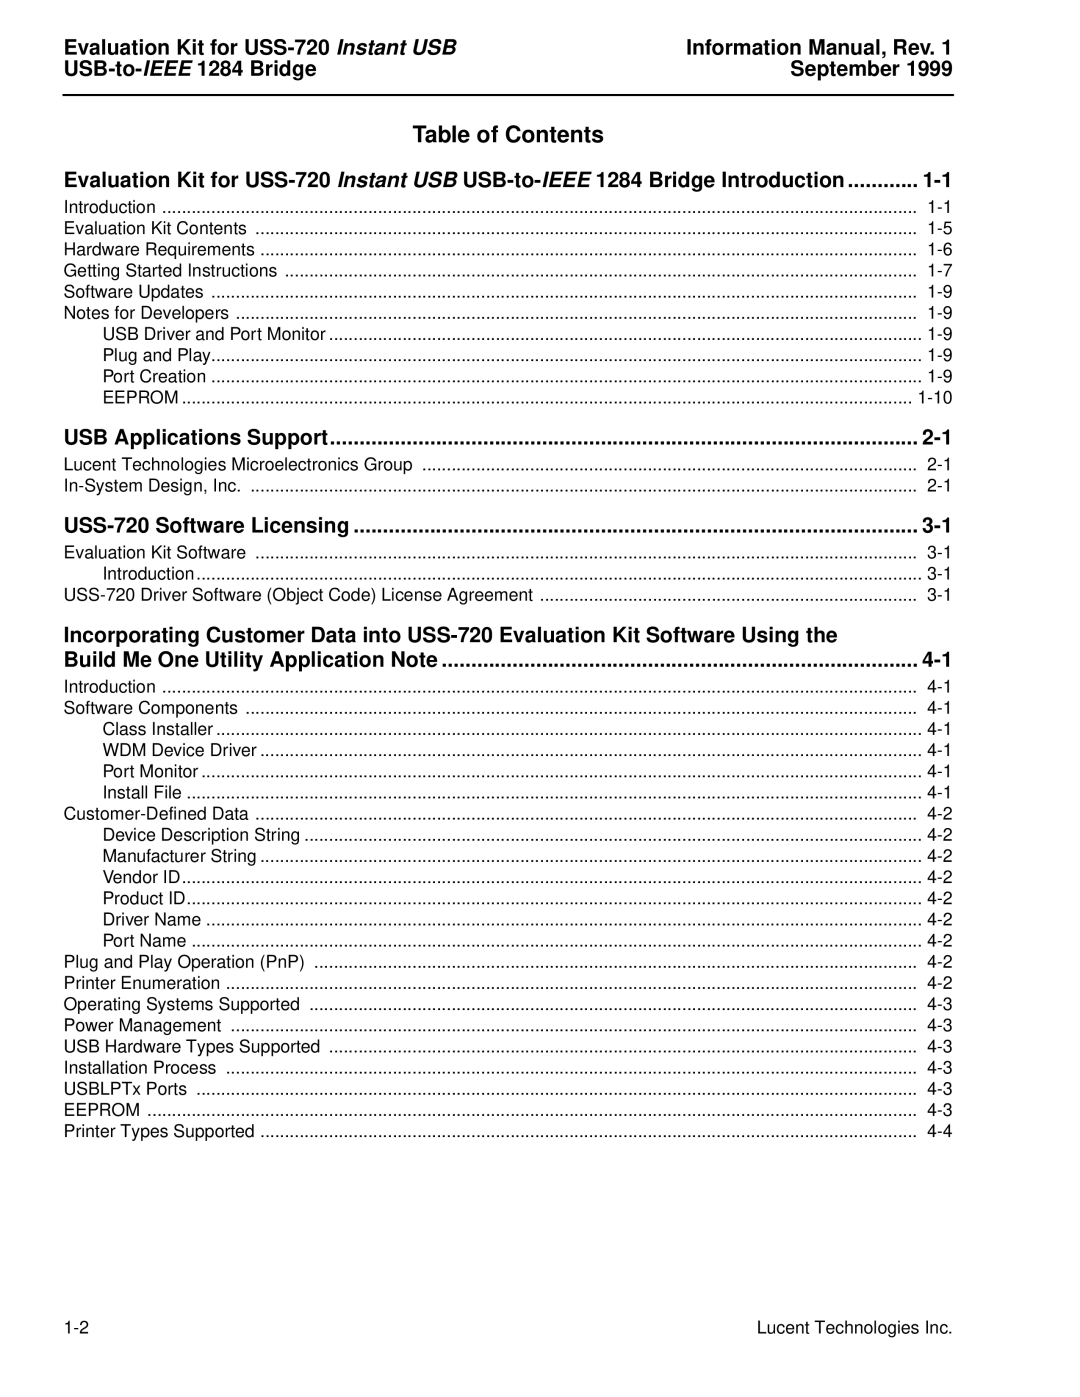 Lucent Technologies manual Table of Contents, Evaluation Kit for USS-720 Instant USB, Information Manual, Rev, September 